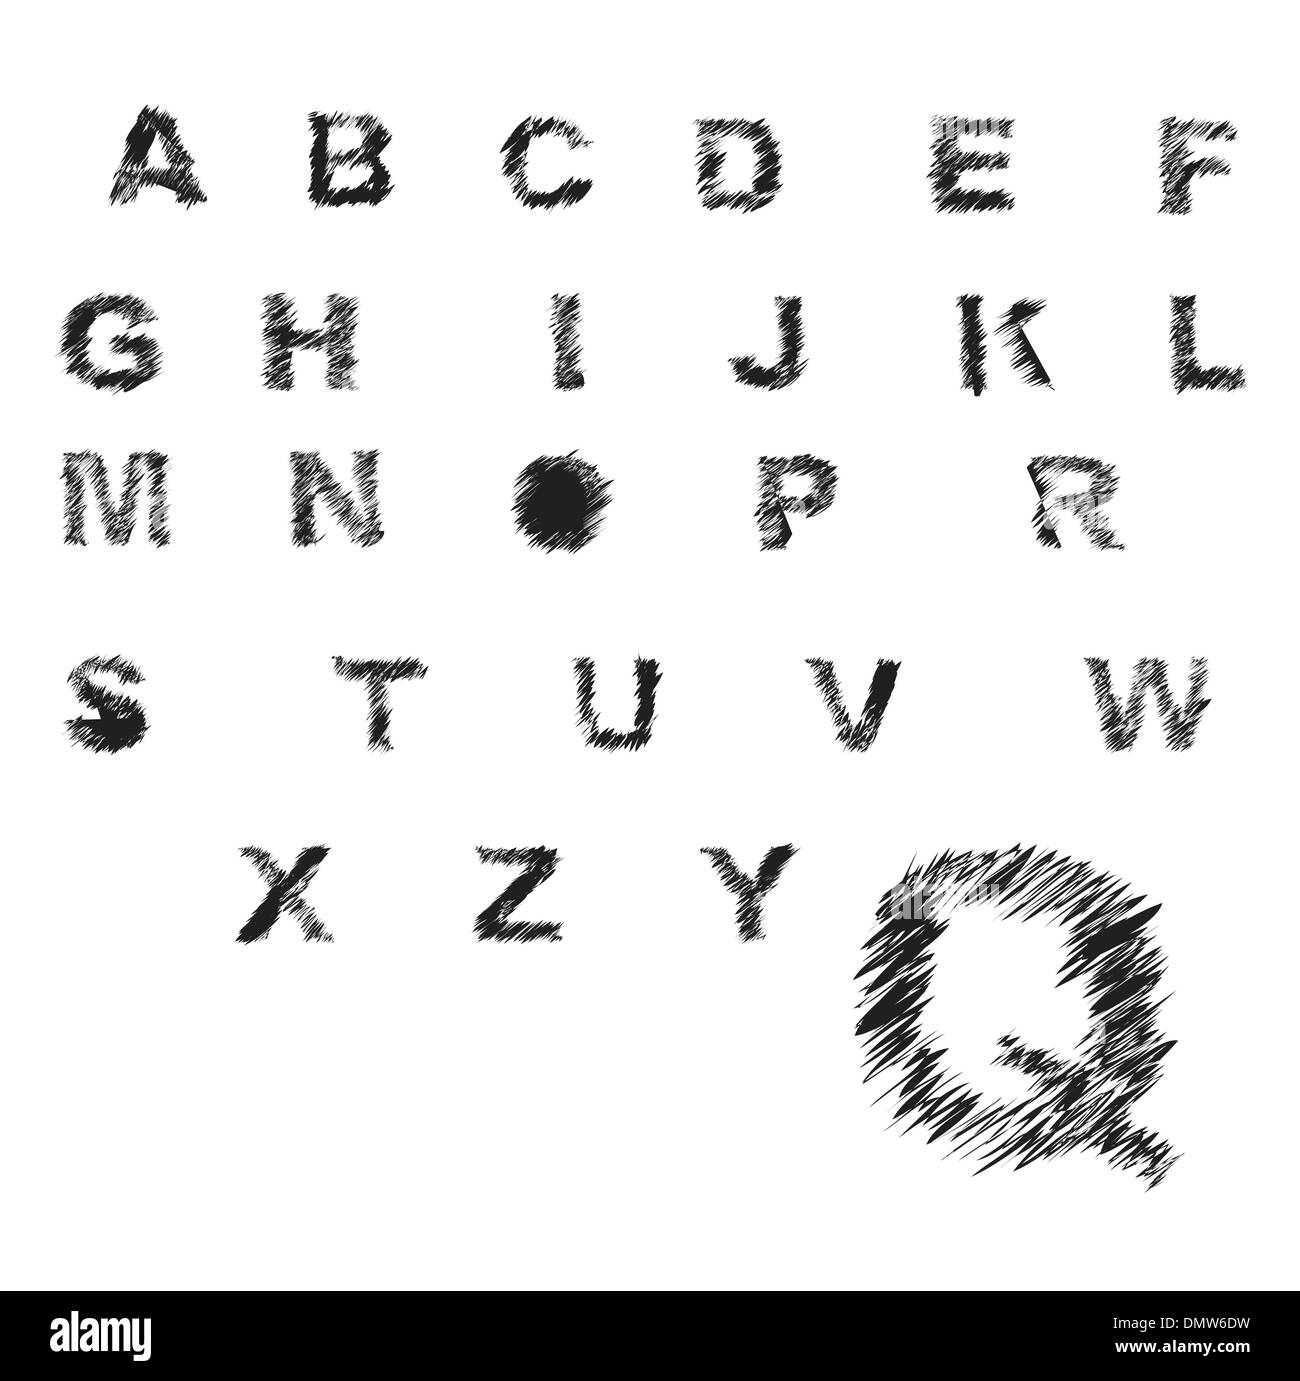 the alphabet sketched in black and white Stock Vector